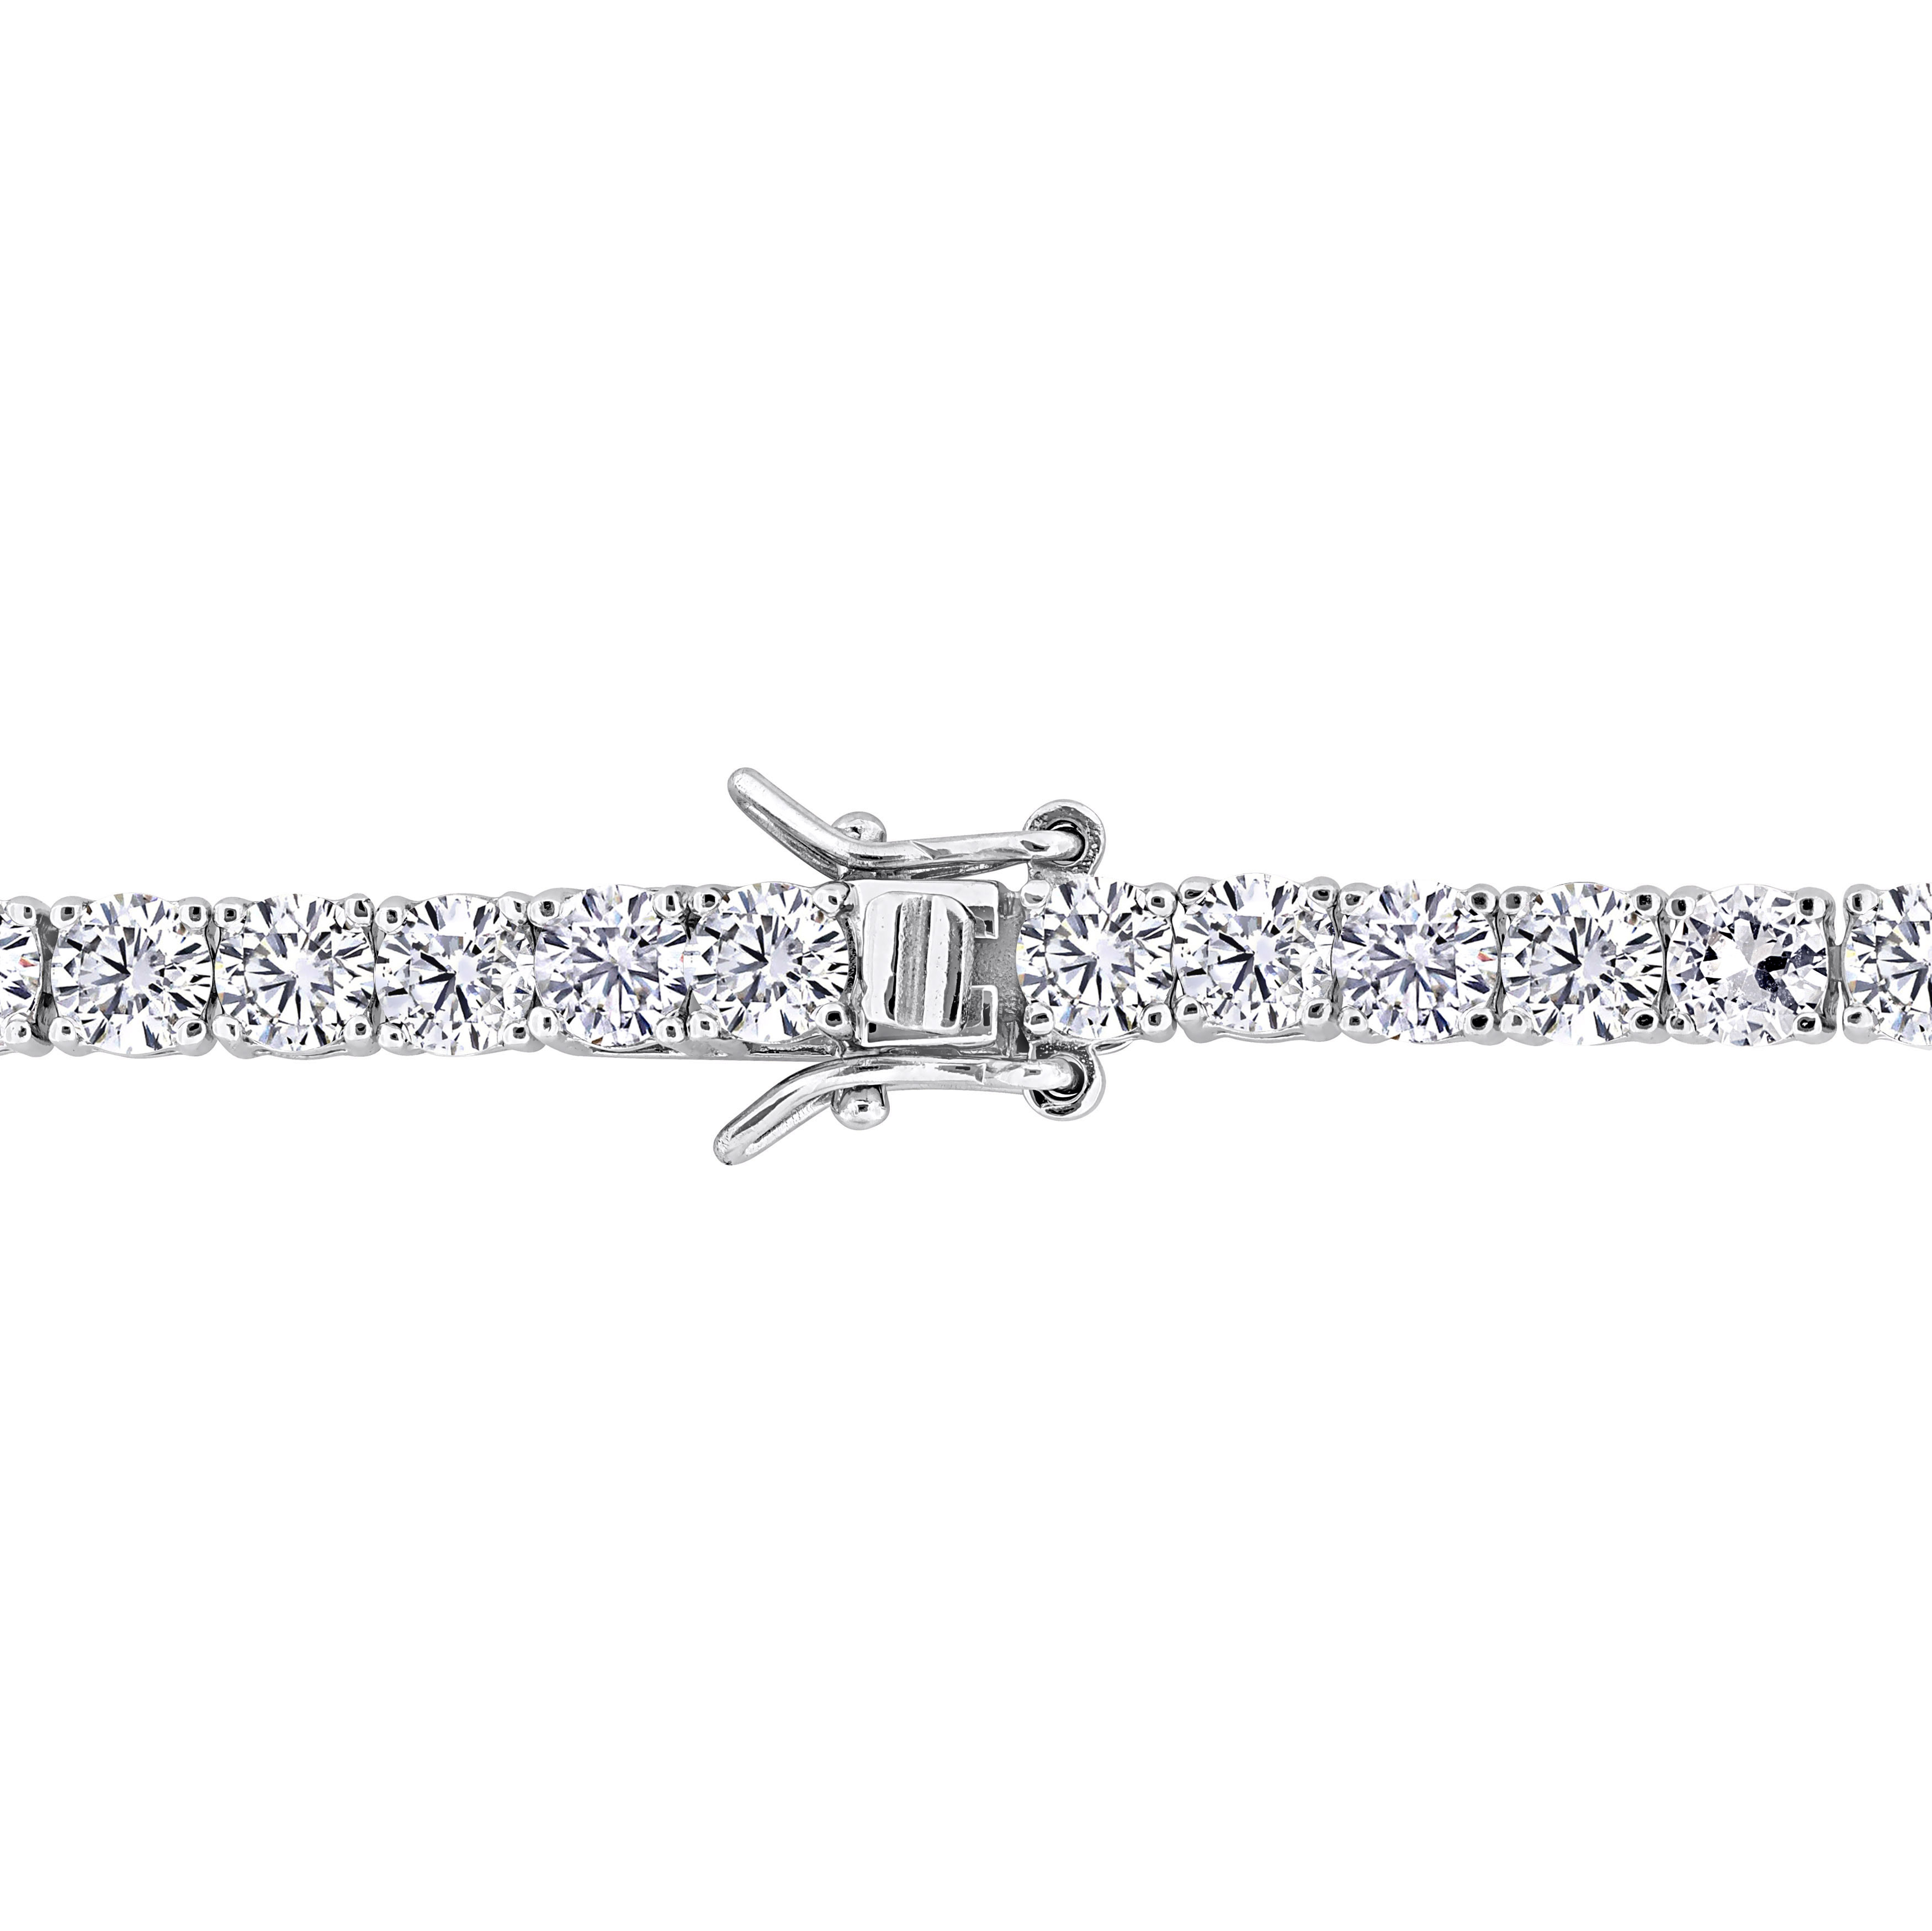 14 1/4 CT TGW Created White Sapphire 7.25 Bracelet Sterling Silver